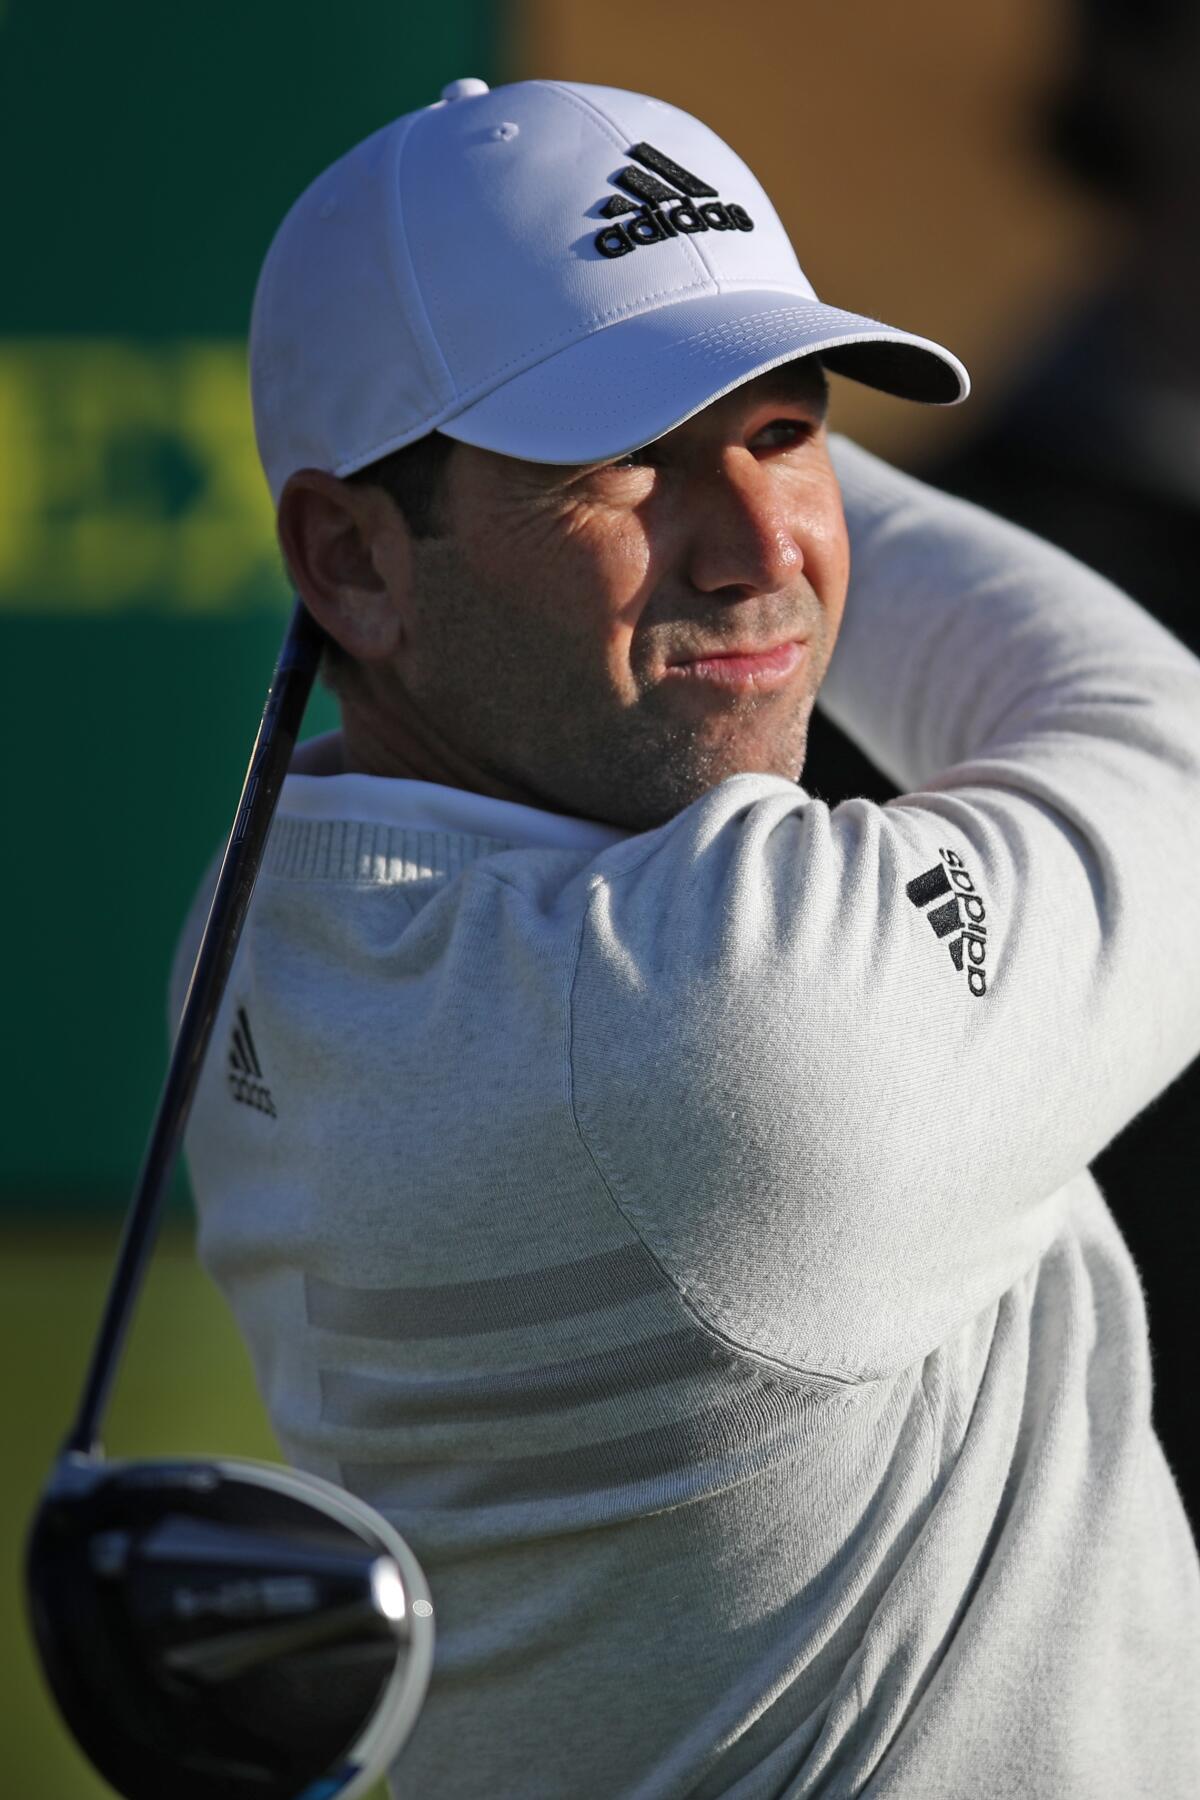 Sergio Garcia takes a shot during the Pro-Am at the Genesis Invitational on Wednesday in Pacific Palisades.